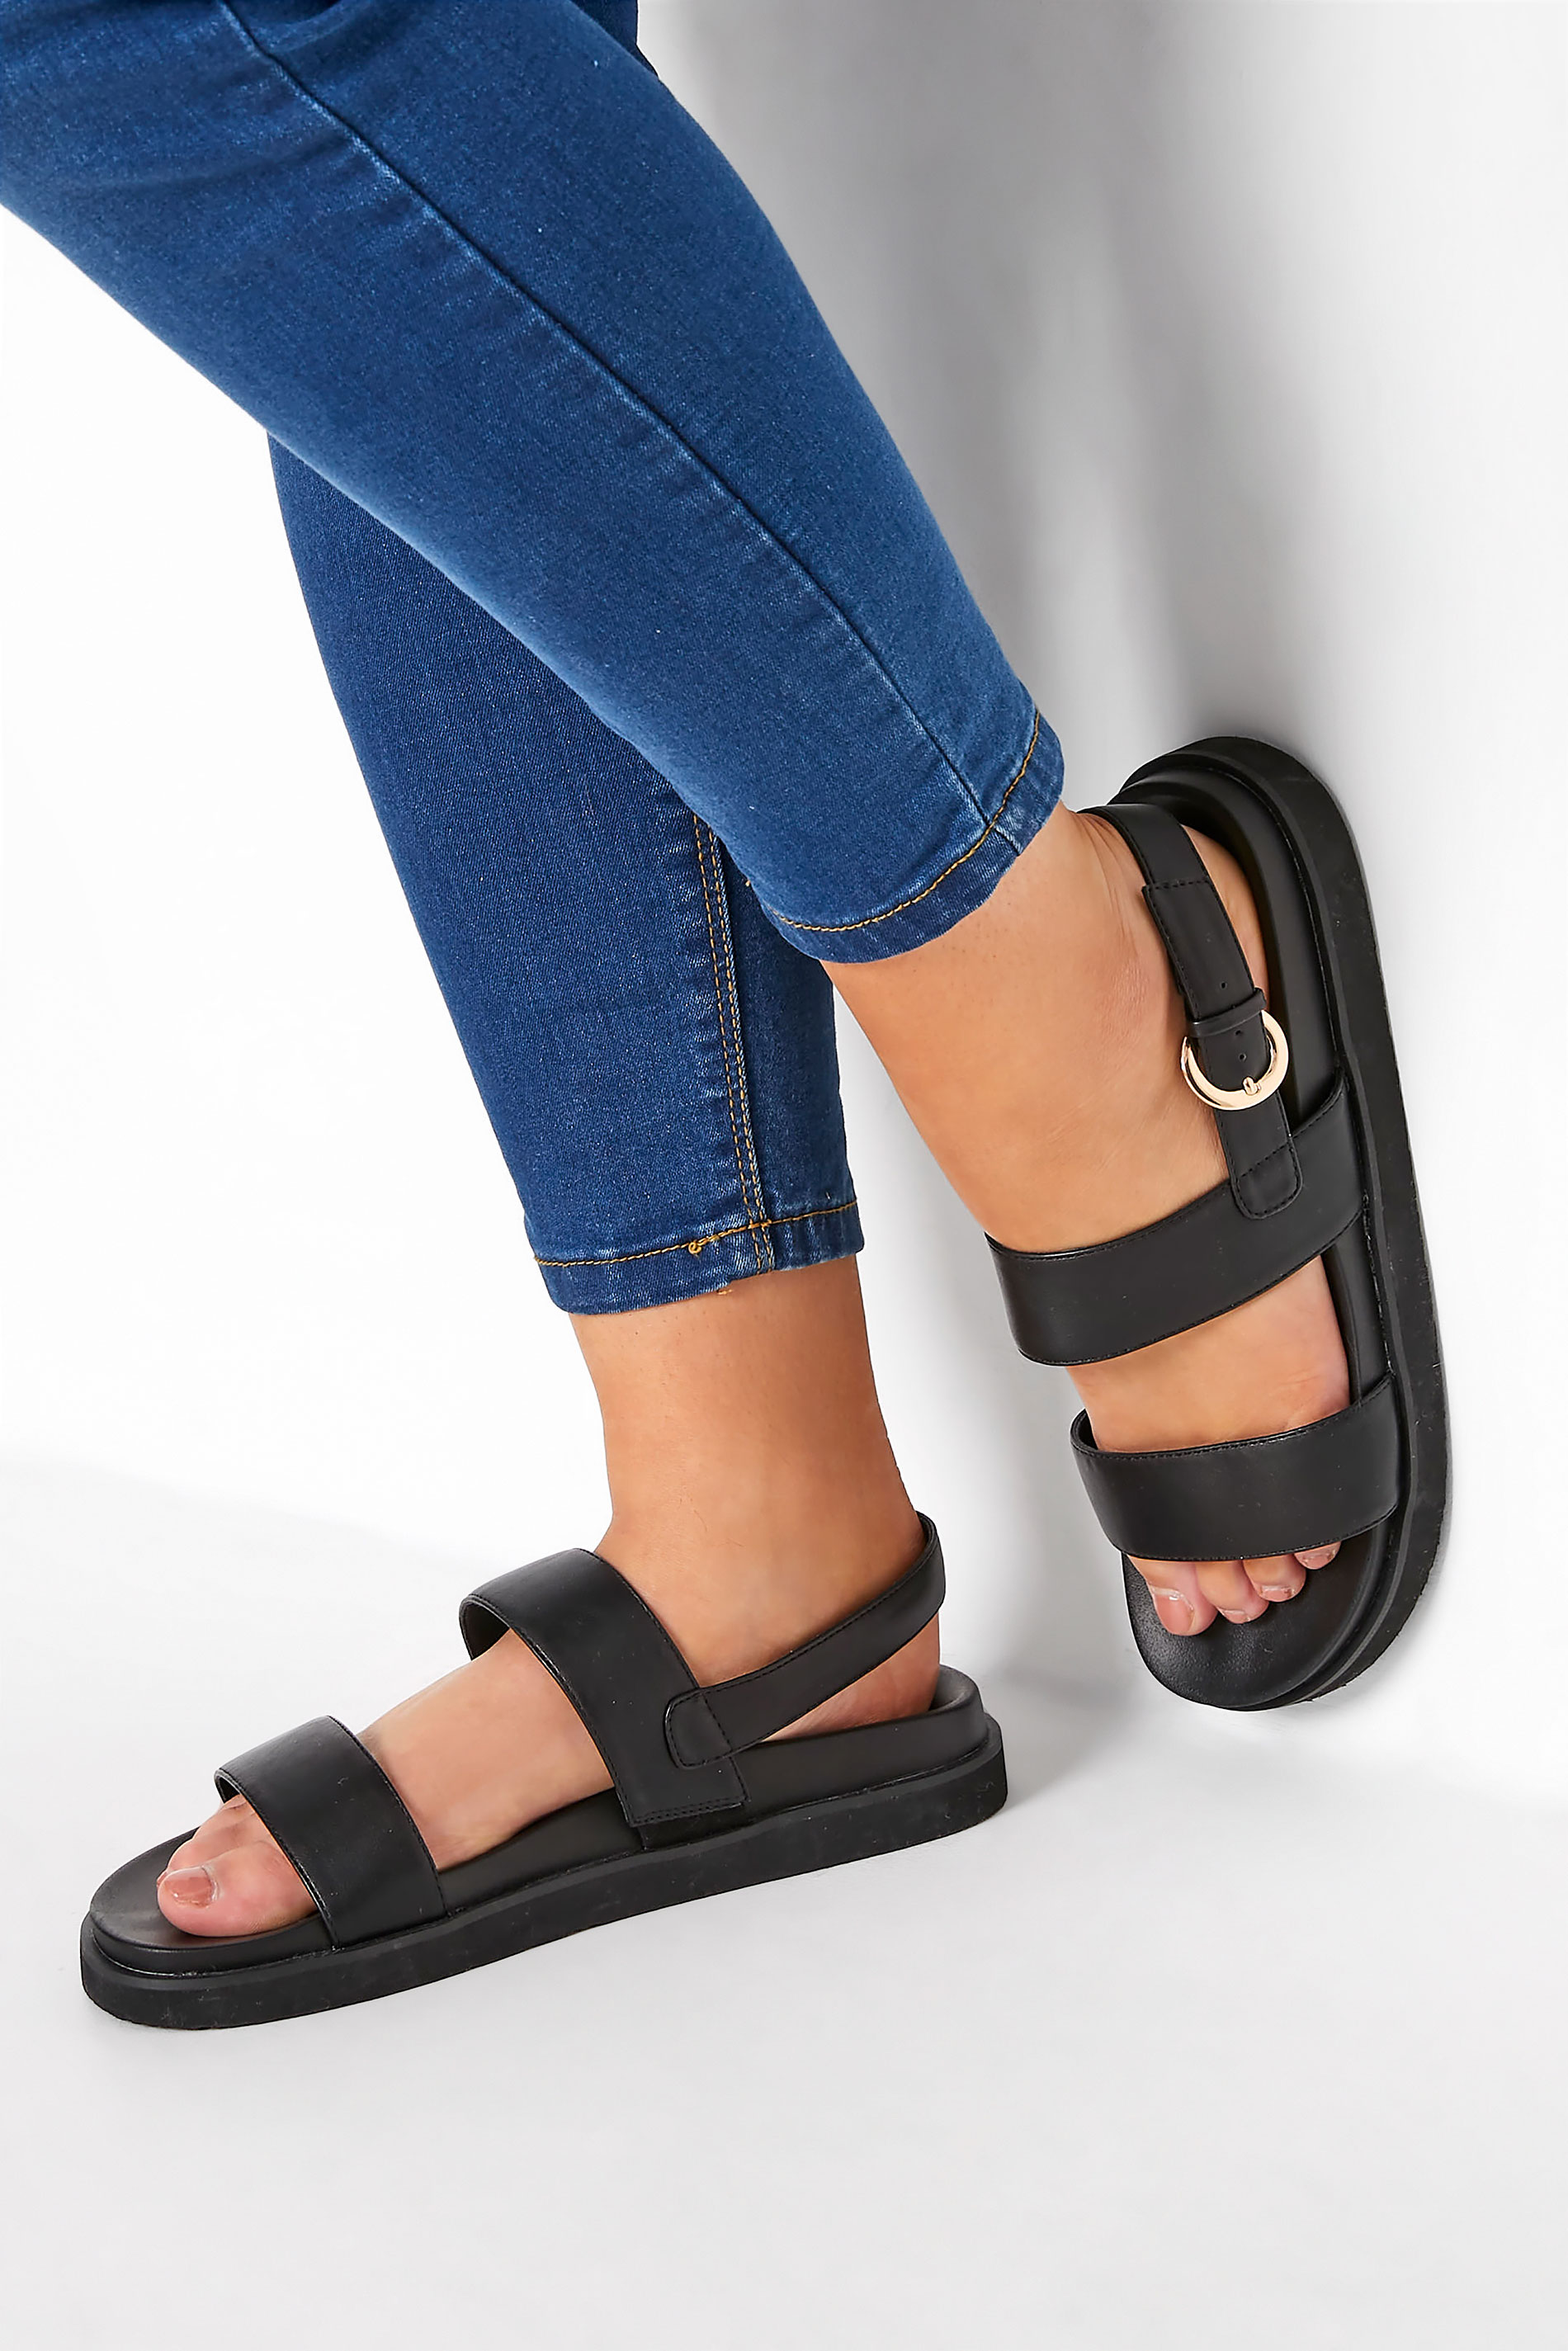 LIMITED COLLECTION Black Double Strap Chunky Sandals In Extra Wide EEE Fit 1